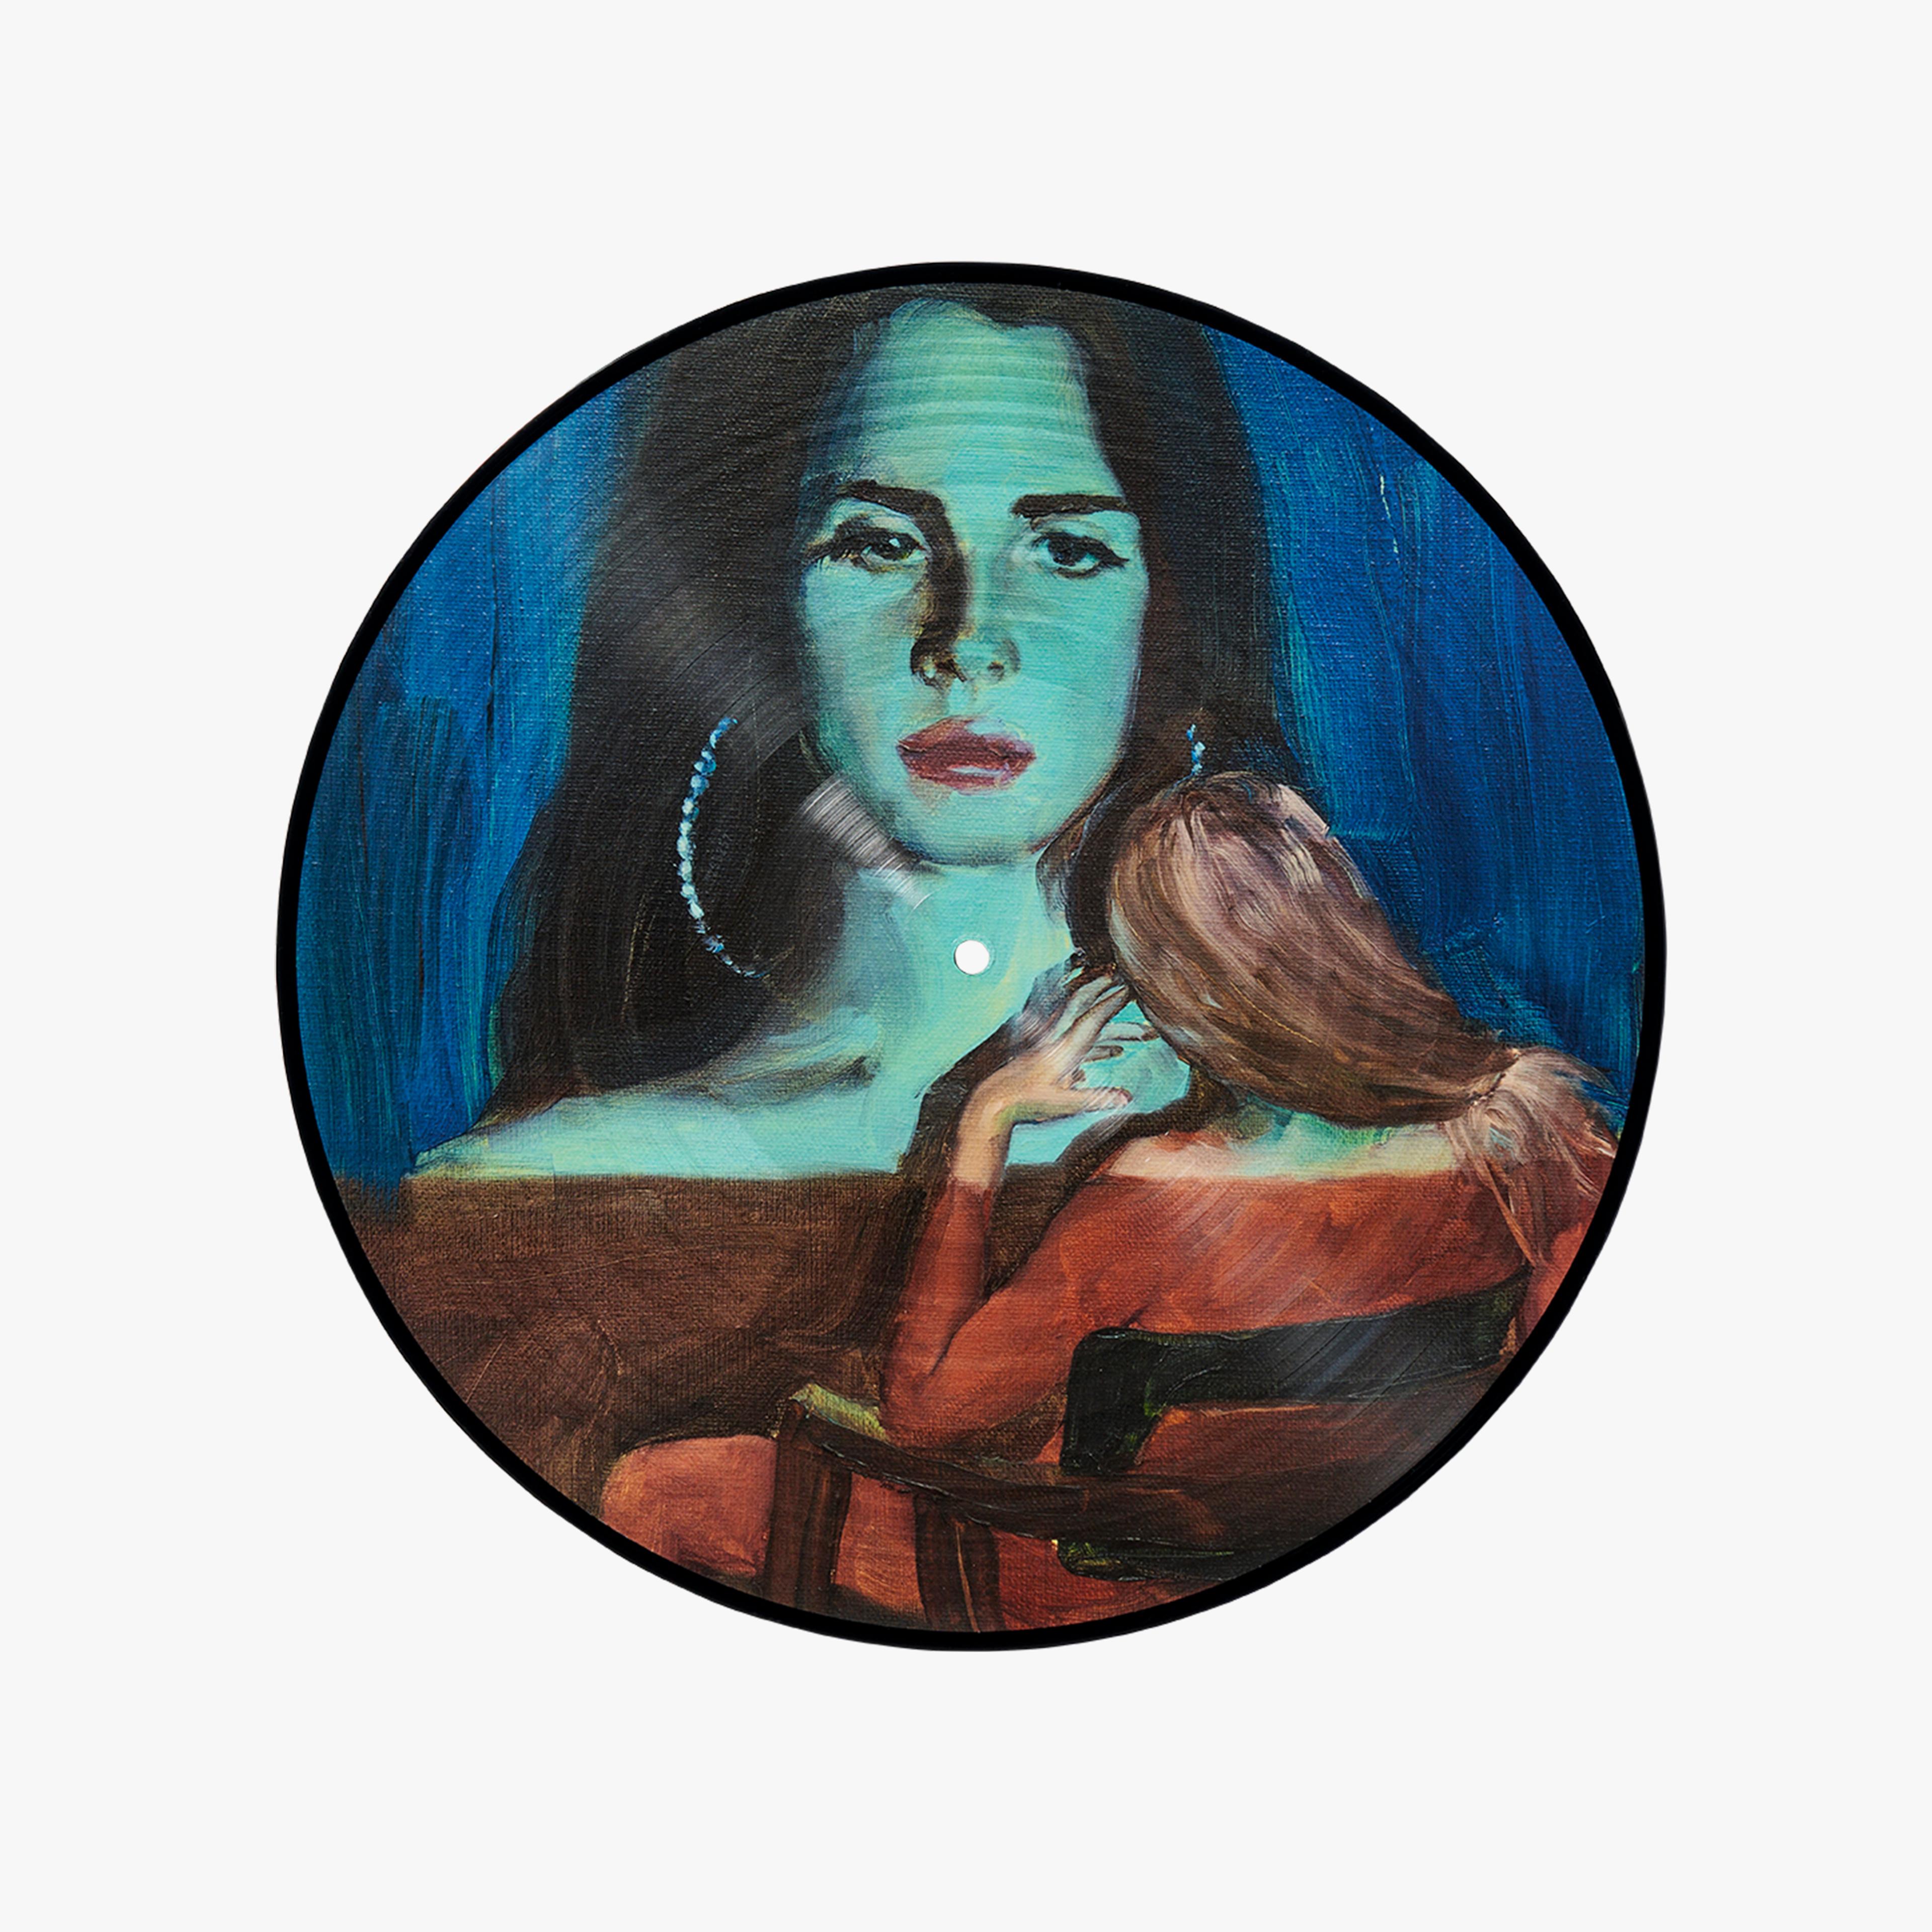 Alternate View 3 of Lana Del Rey - Born To Die by Jenna Gribbon Gallery Picture Disc